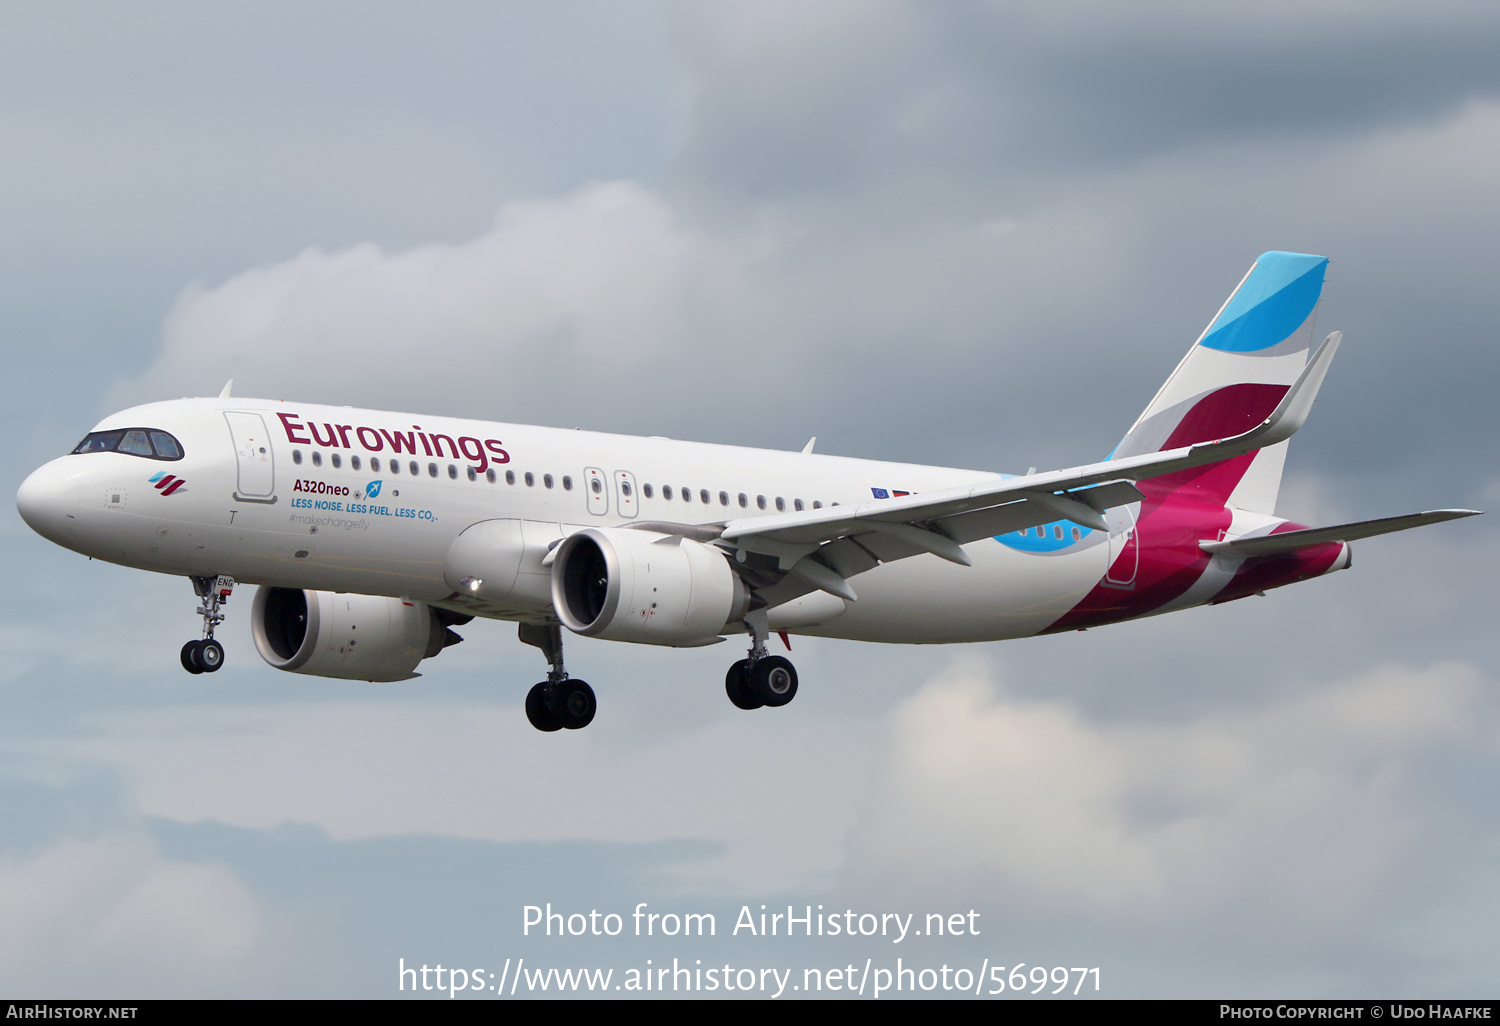 Aircraft Photo Of D Aeng Airbus A N Eurowings Airhistory My Xxx Hot Girl